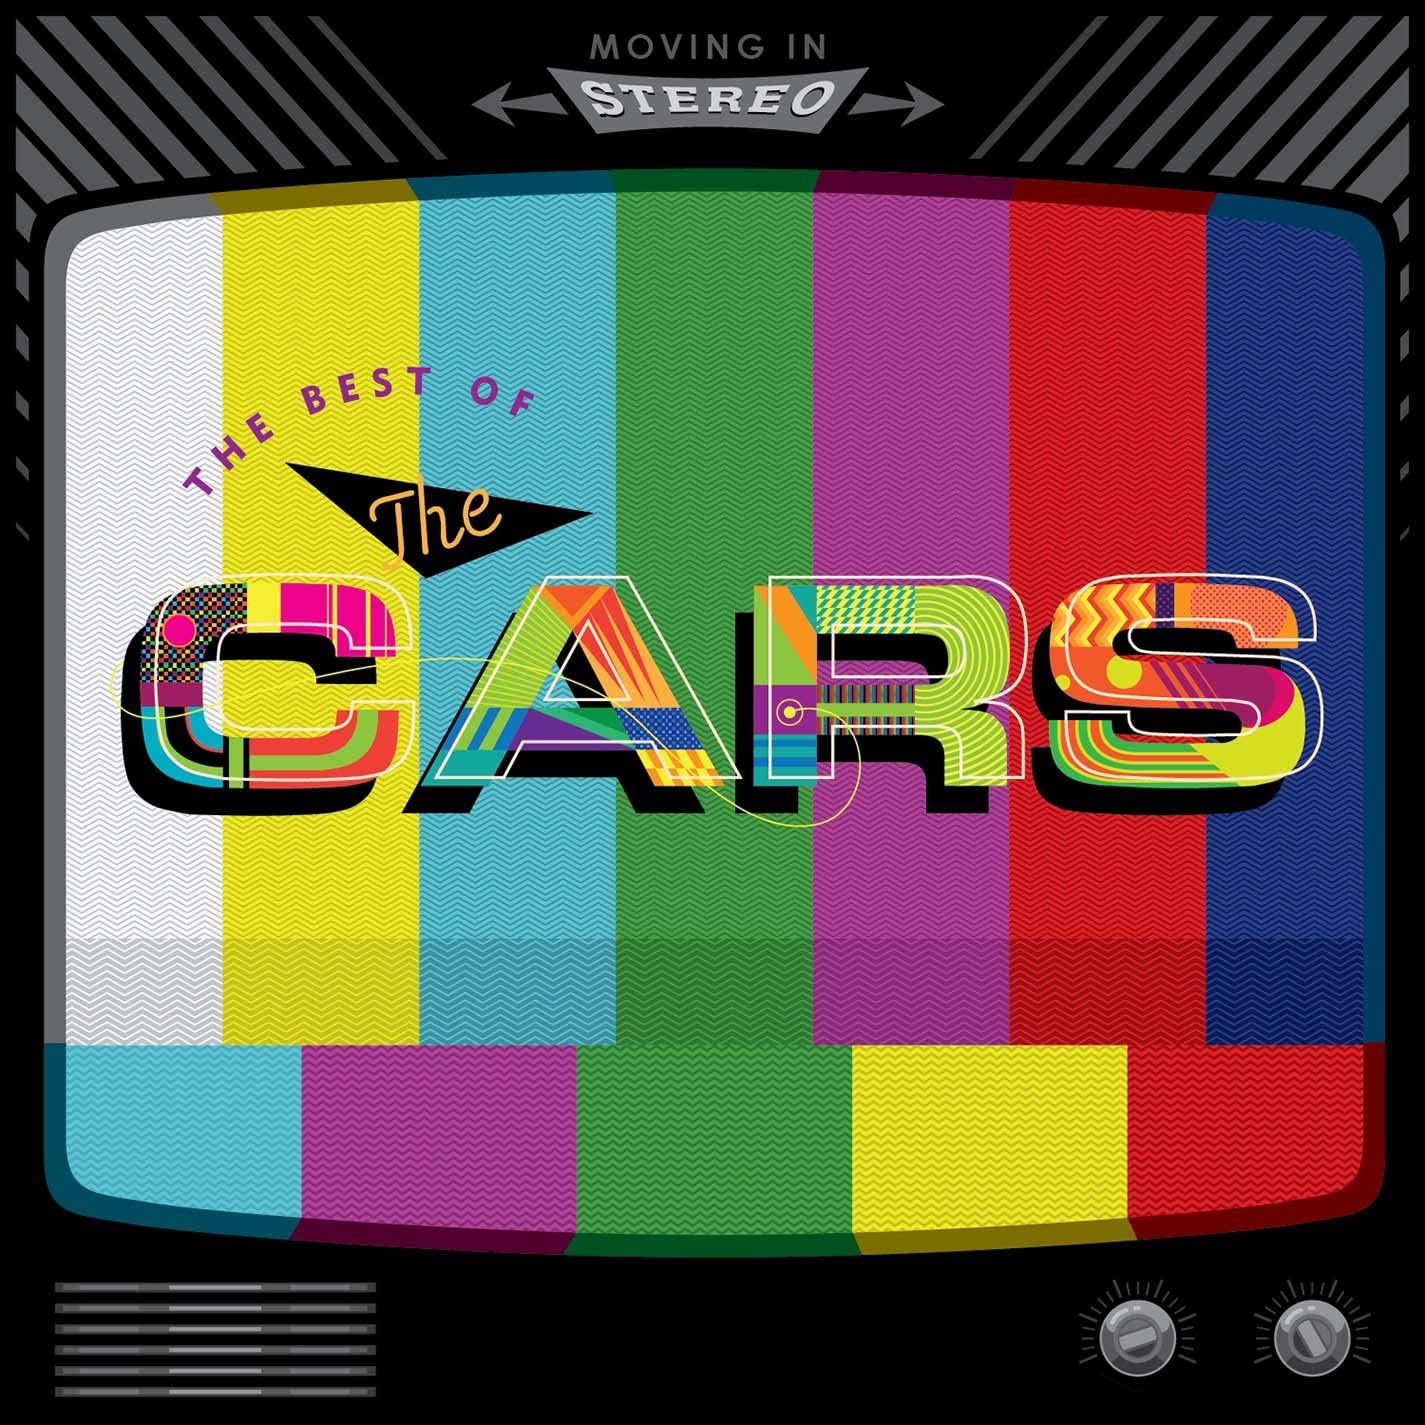 Cars - Moving In Stereo, The Best Of the Cars (Vinyl 2LP)